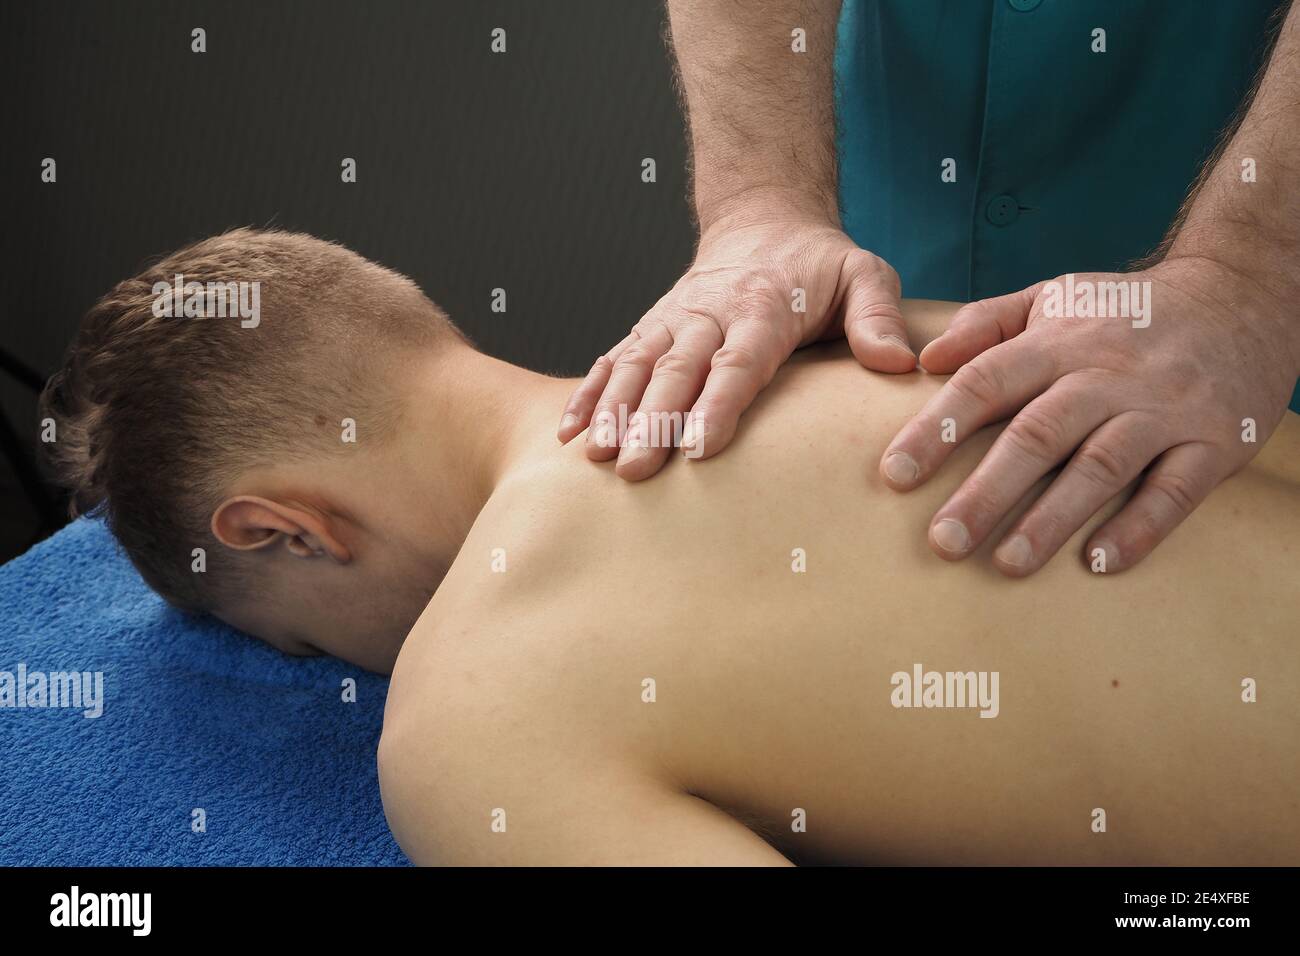 https://c8.alamy.com/comp/2E4XFBE/spa-and-health-manual-back-massage-a-man-on-a-massage-couch-2E4XFBE.jpg